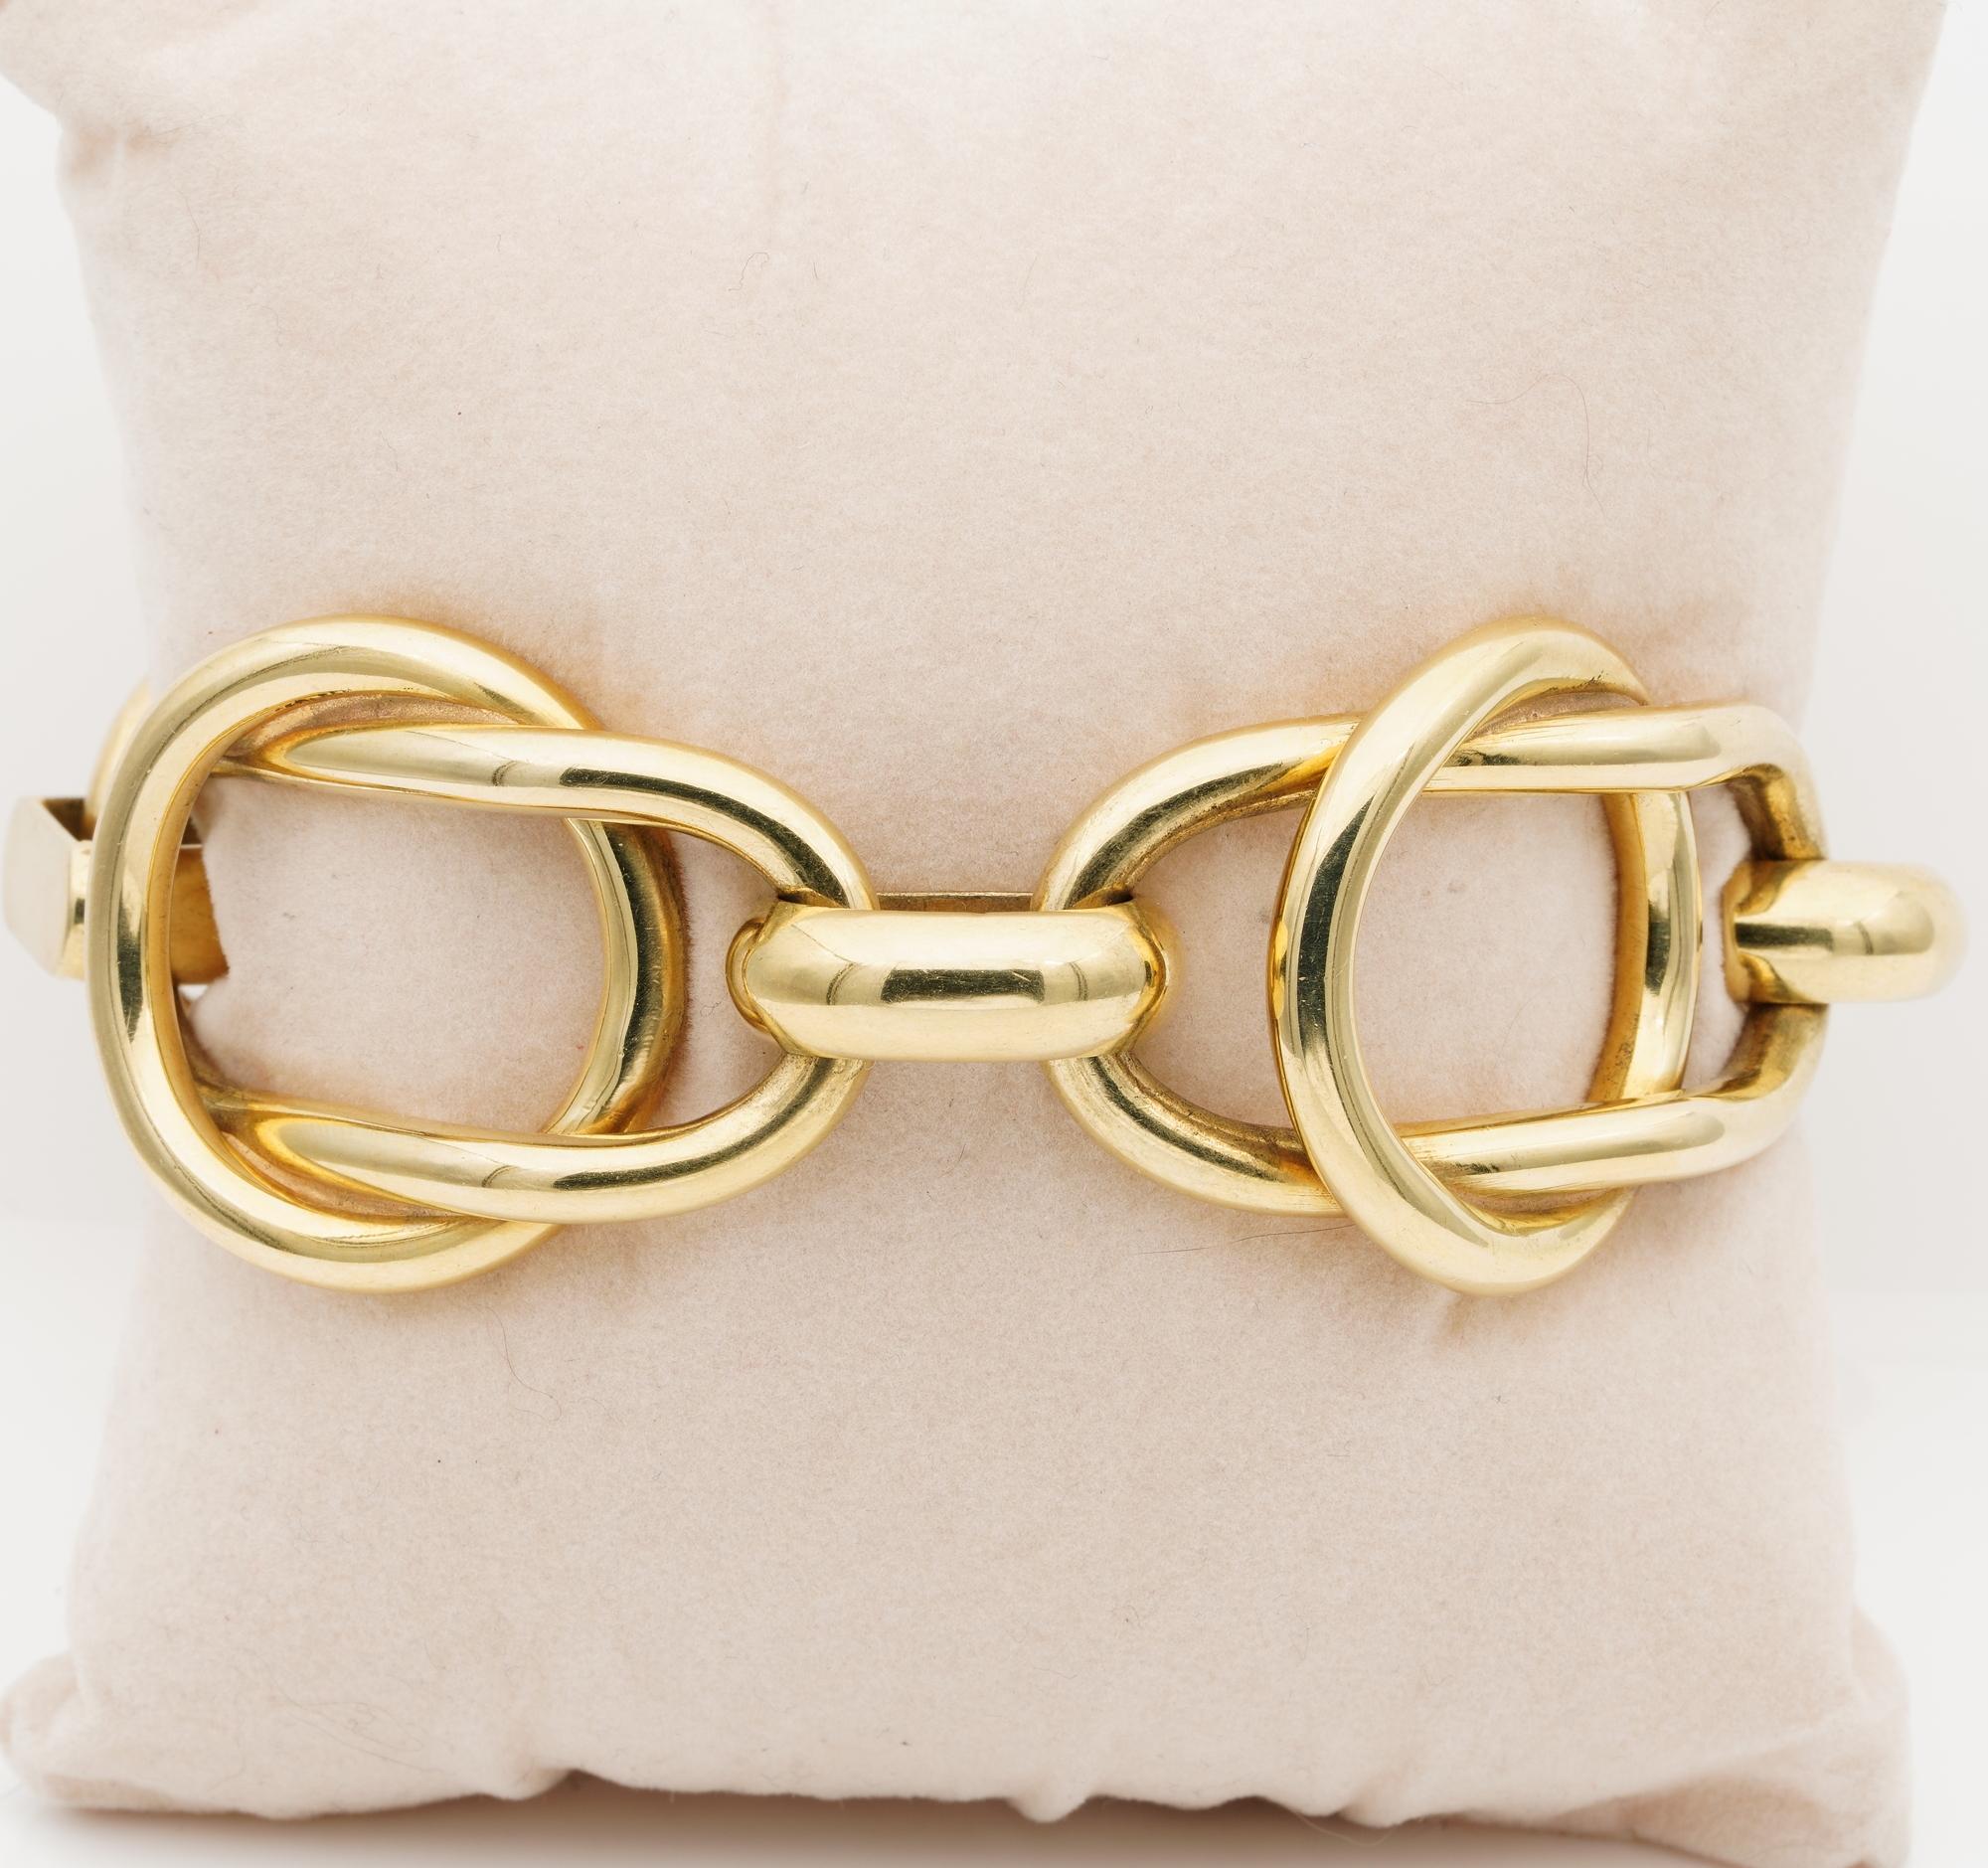 Enjoying Gold
This very unique fancy link Italian vintage bracelet is such a lovely thing to wear on jeans or formal outfit
Substantial in weight being 62.8 grams of solid 18 Kt gold, stylish combination of interlaced between two shapes of geometric